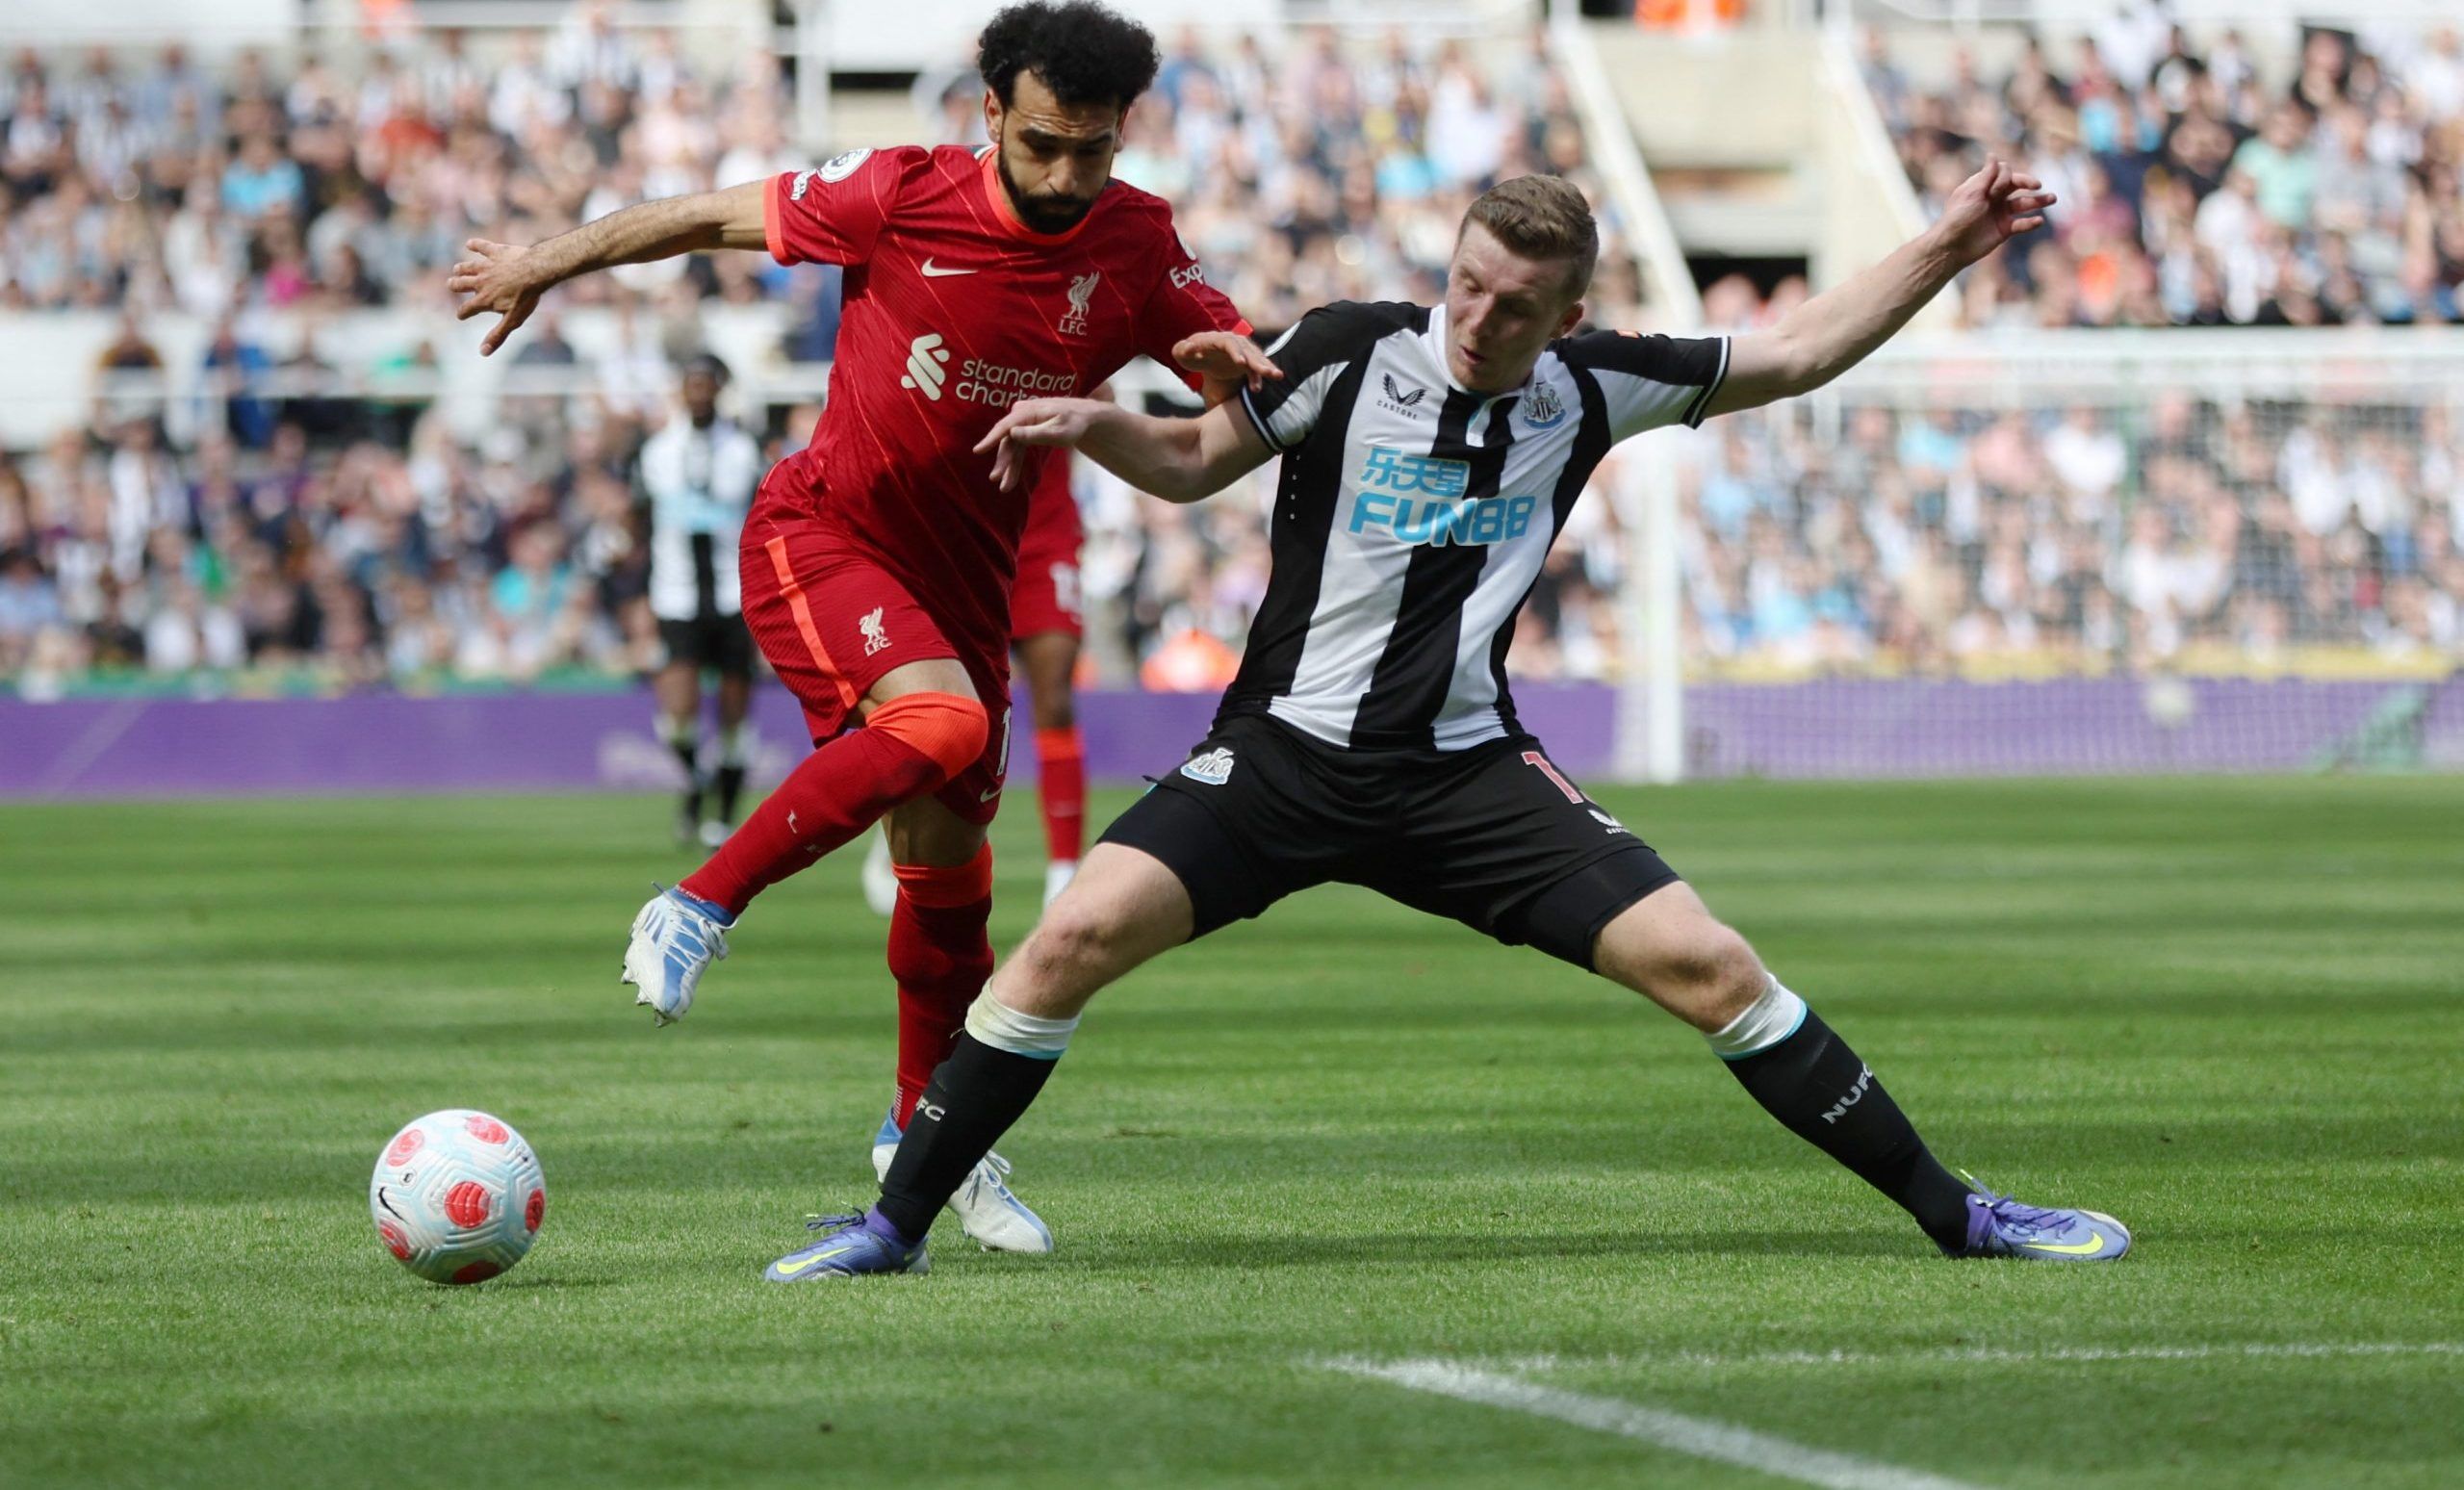 Soccer Football - Premier League - Newcastle United v Liverpool - St James' Park, Newcastle, Britain - April 30, 2022 Liverpool's Mohamed Salah in action with Newcastle United's Matt Targett Action Images via Reuters/Lee Smith EDITORIAL USE ONLY. No use with unauthorized audio, video, data, fixture lists, club/league logos or 'live' services. Online in-match use limited to 75 images, no video emulation. No use in betting, games or single club /league/player publications.  Please contact your acc